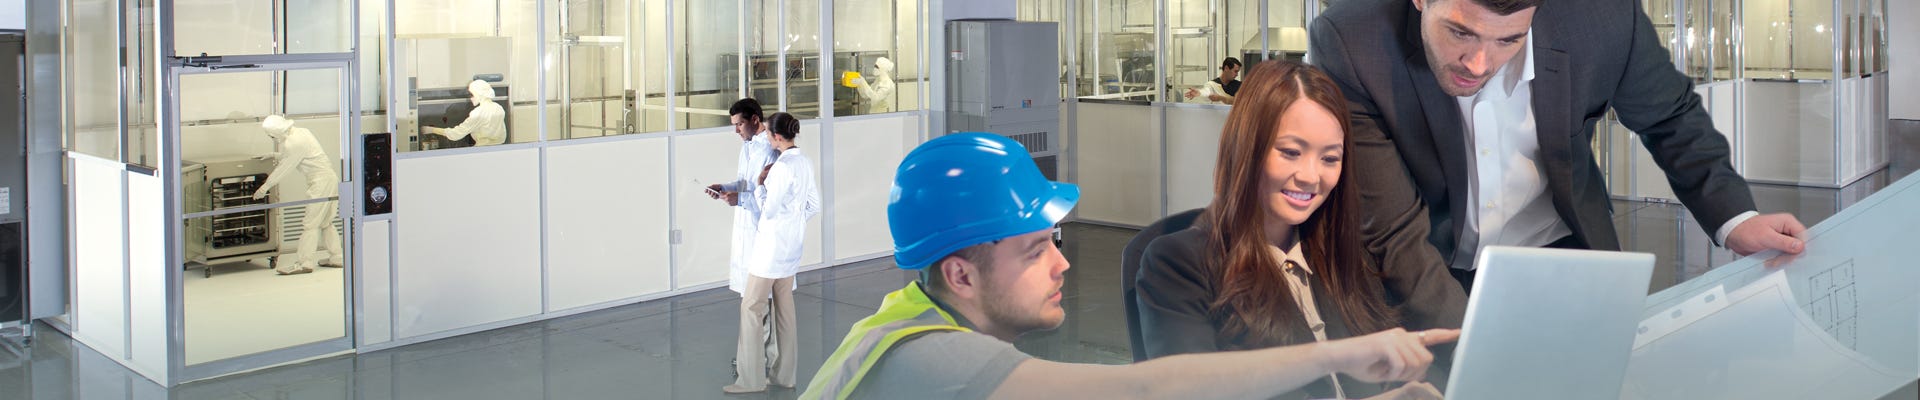 Cleanroom Components for Contractors